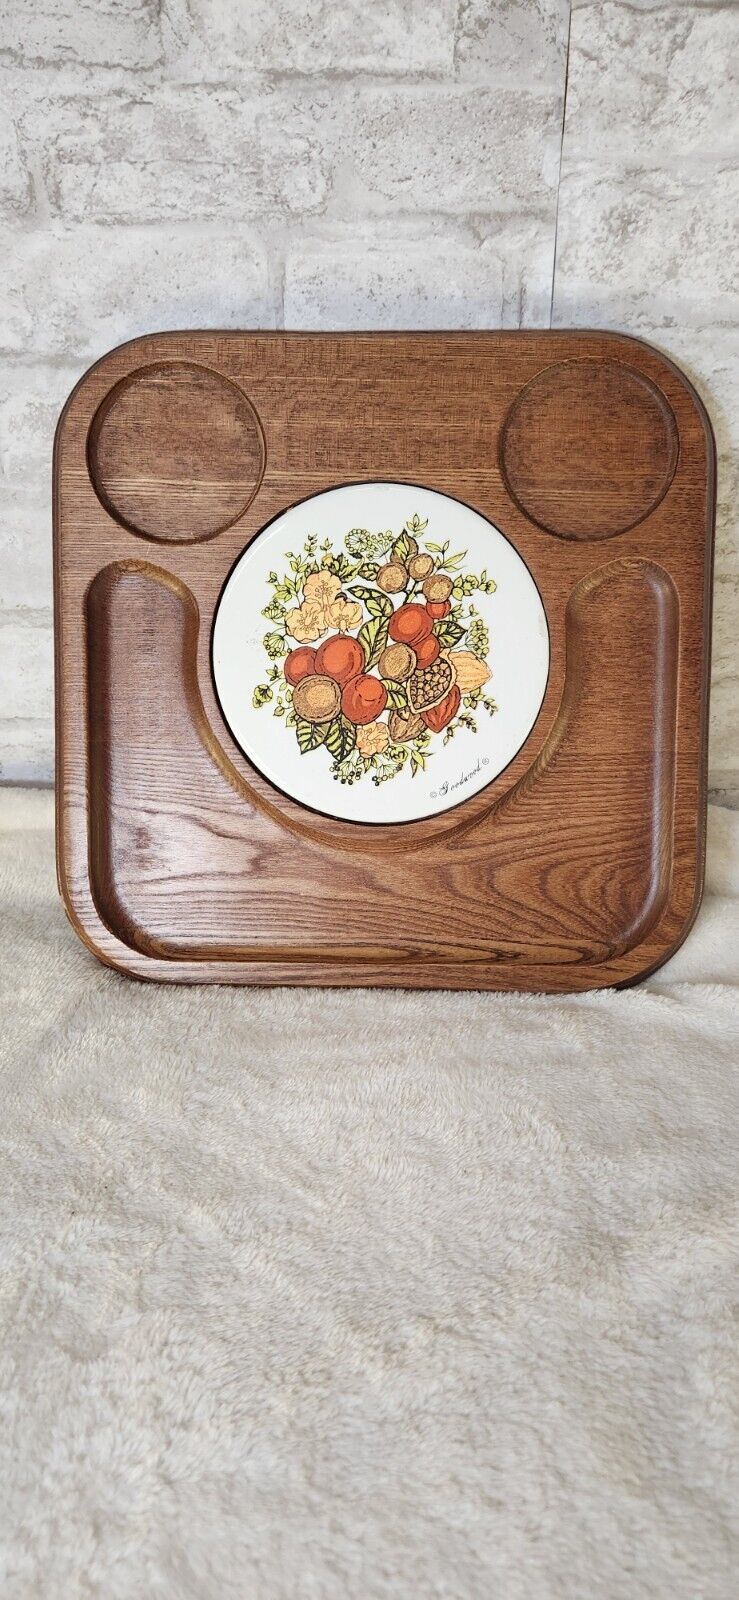 Vintage Wooden Cheese Board Charcuterie Meat Wine Tray Retro Ceramic Goodwood